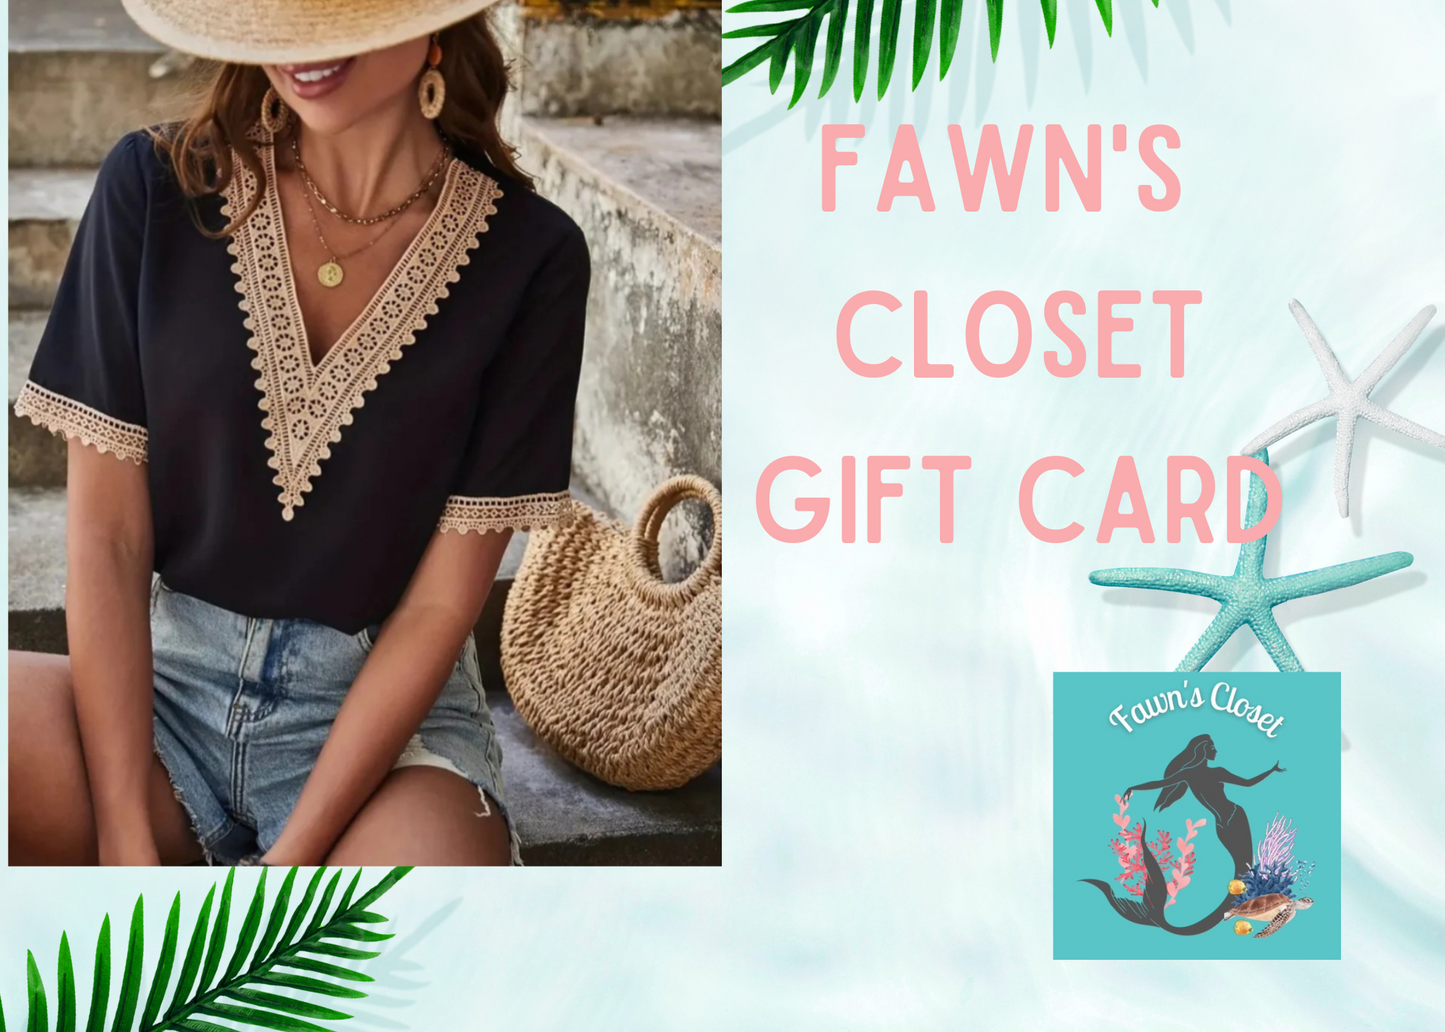 FAWNS GIFT CARD